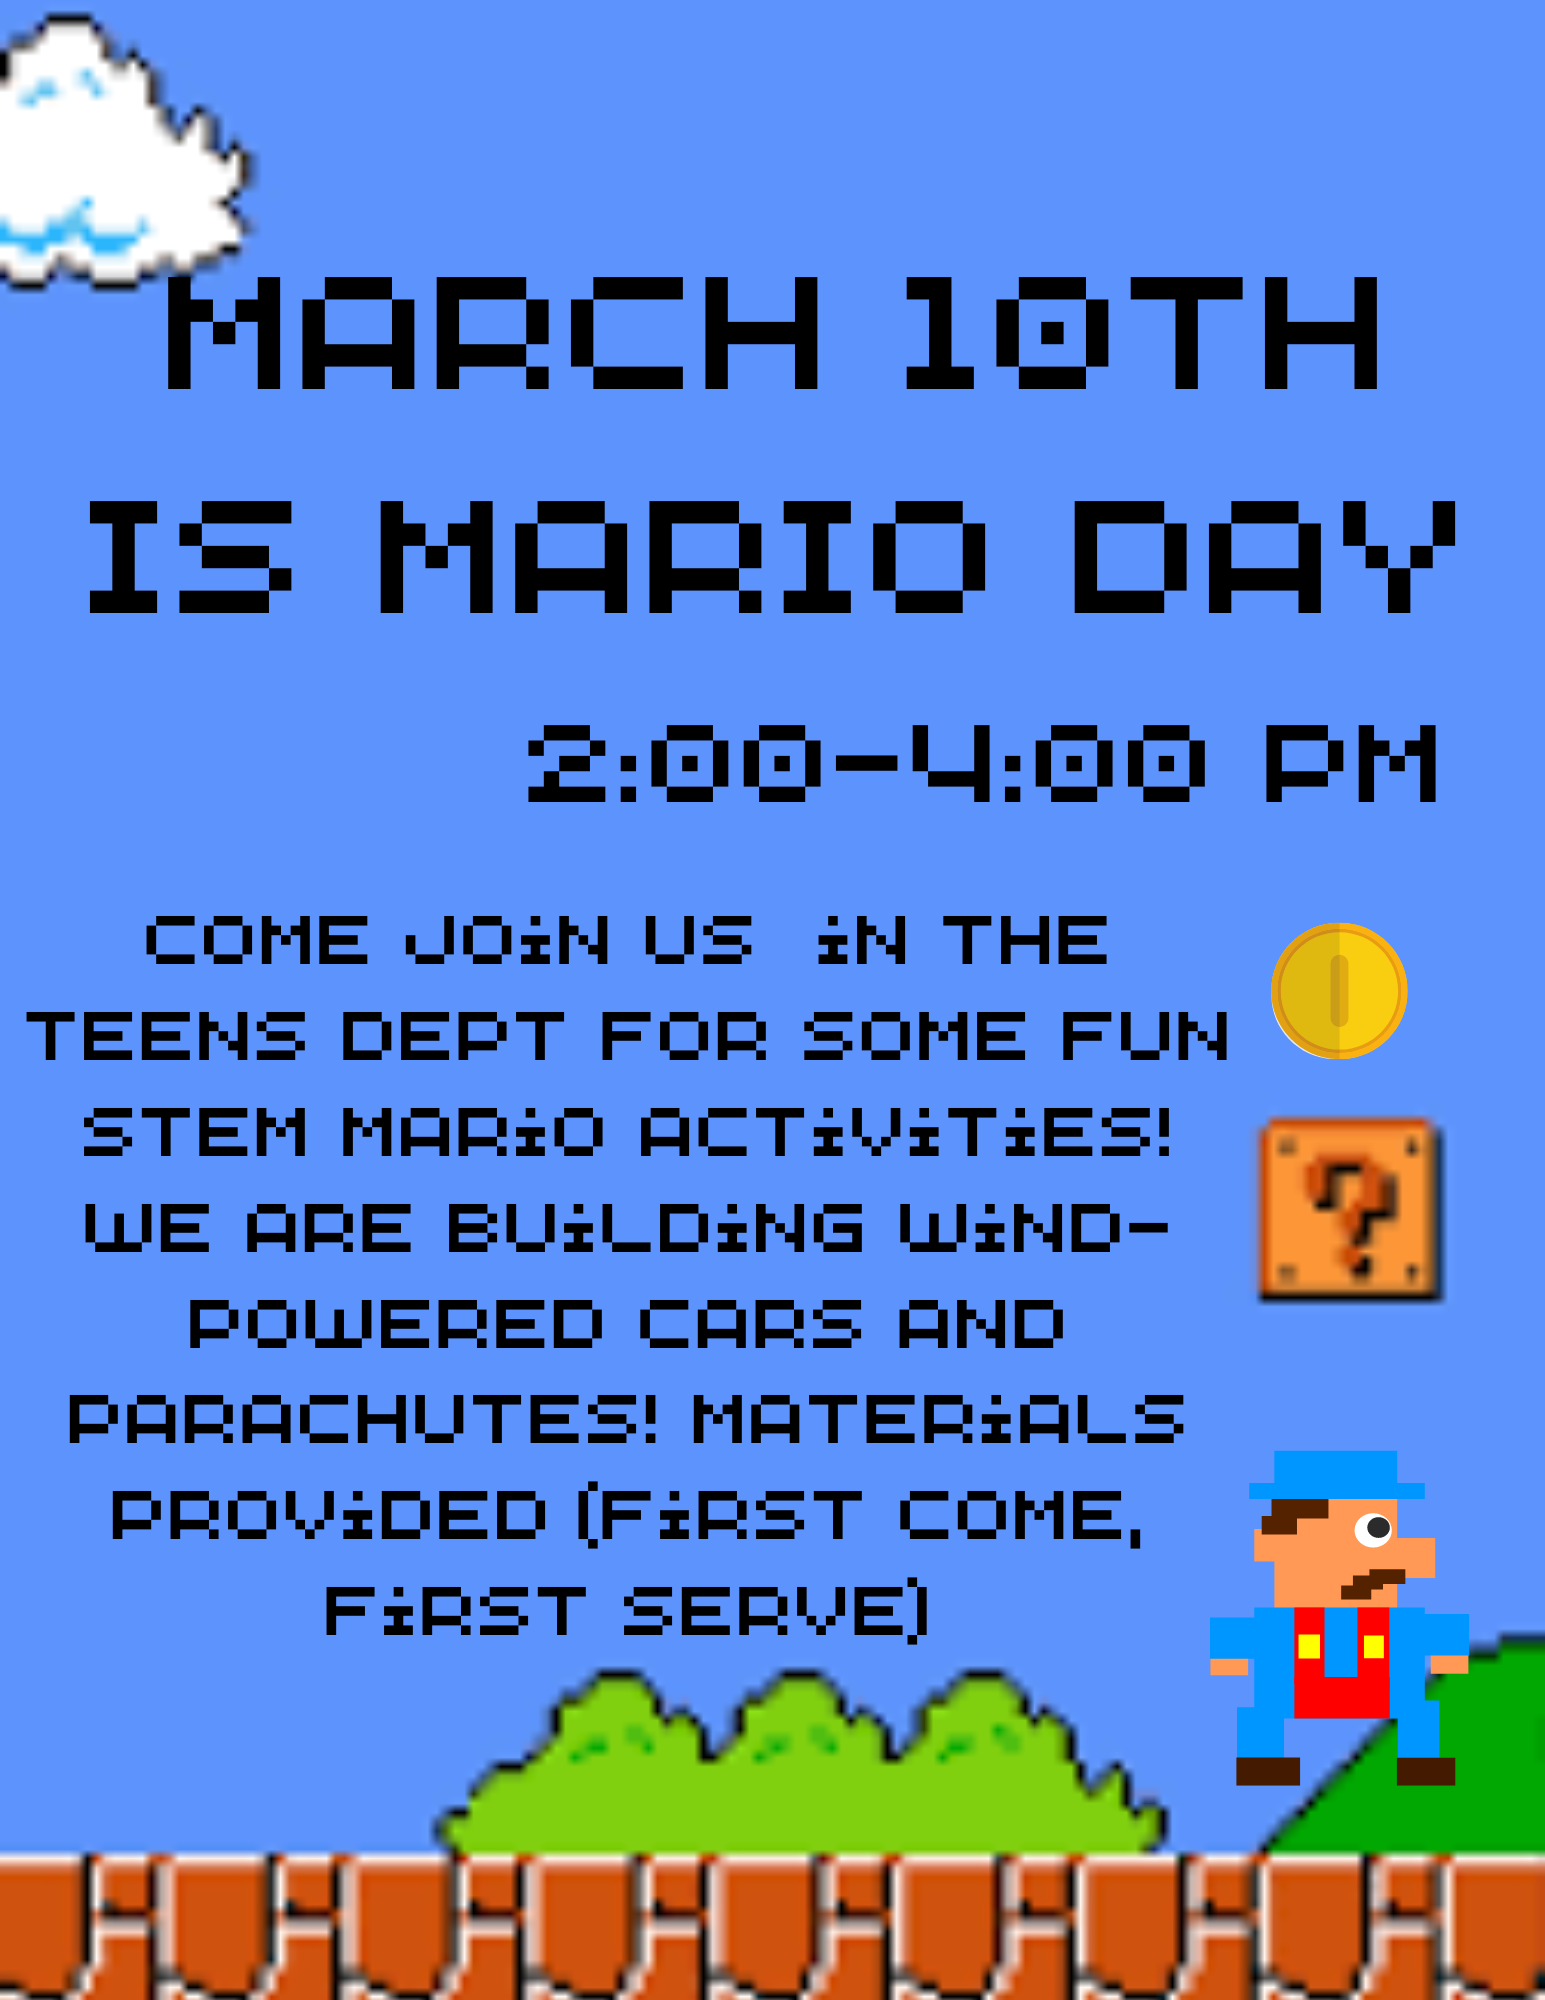 March 10th is Mario Day - Mario background from video game